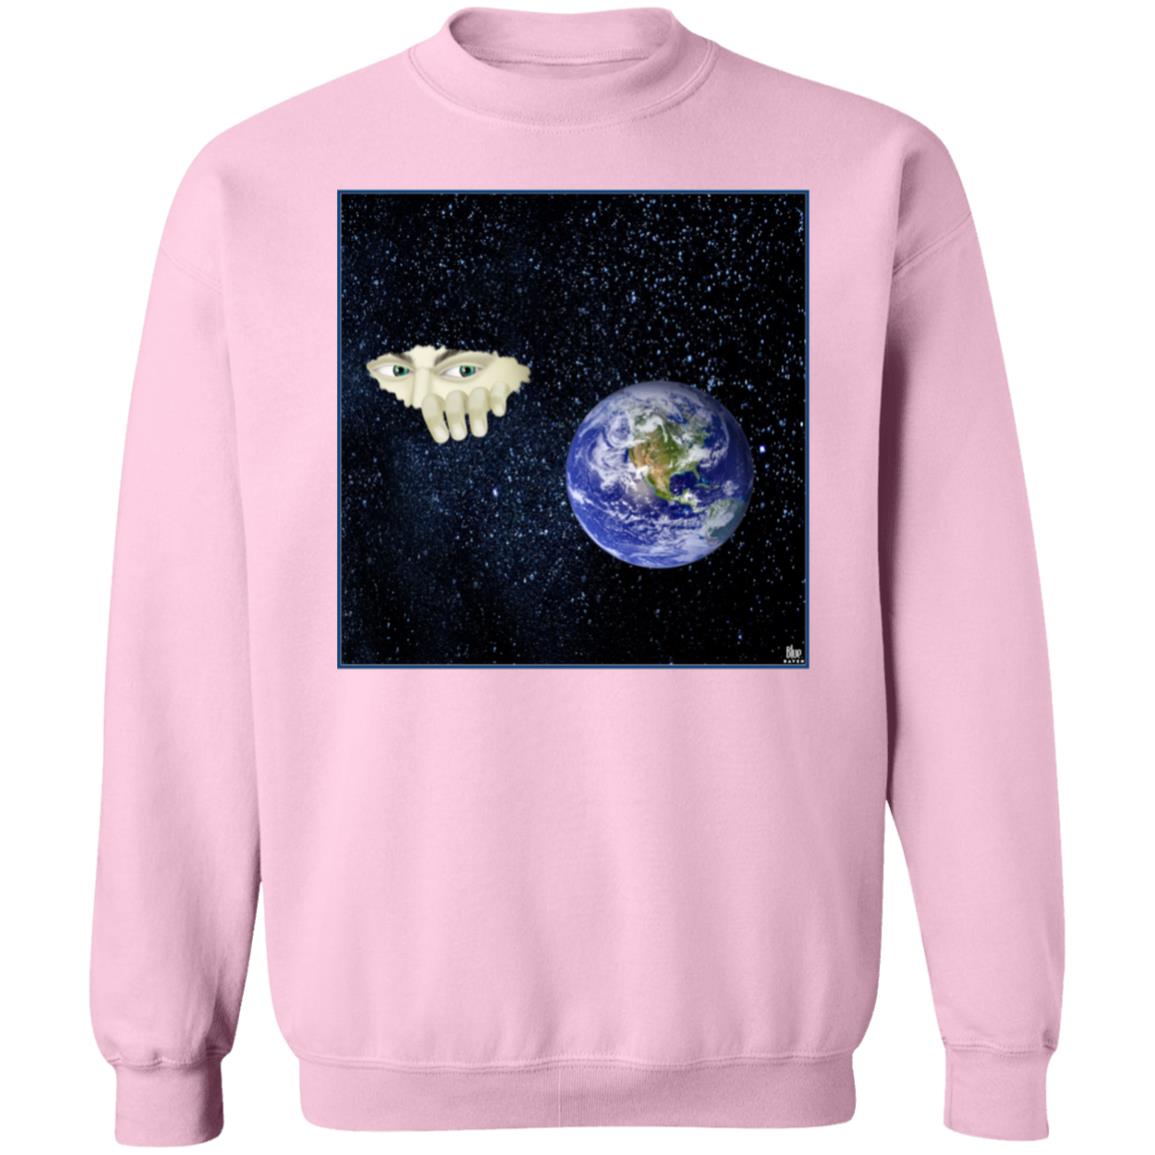 Somewhere Out There - Unisex Crew Neck Sweatshirt